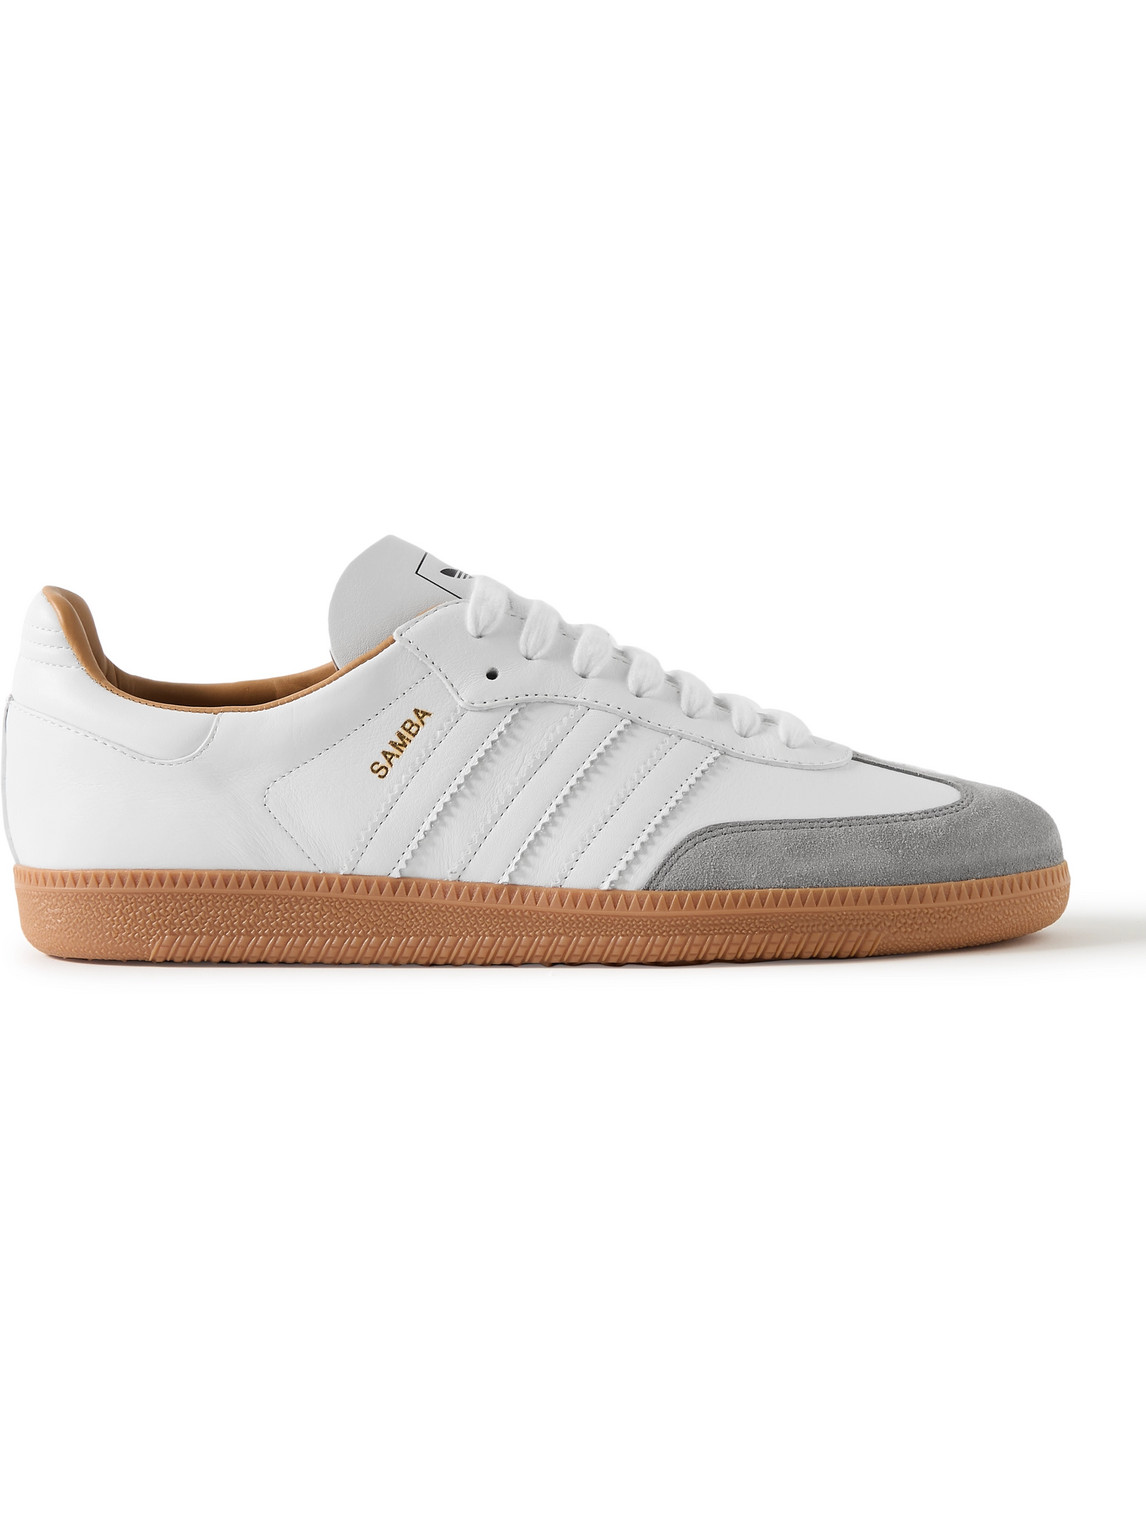 Adidas Originals Samba Og Suede-trimmed Leather Sneakers In White